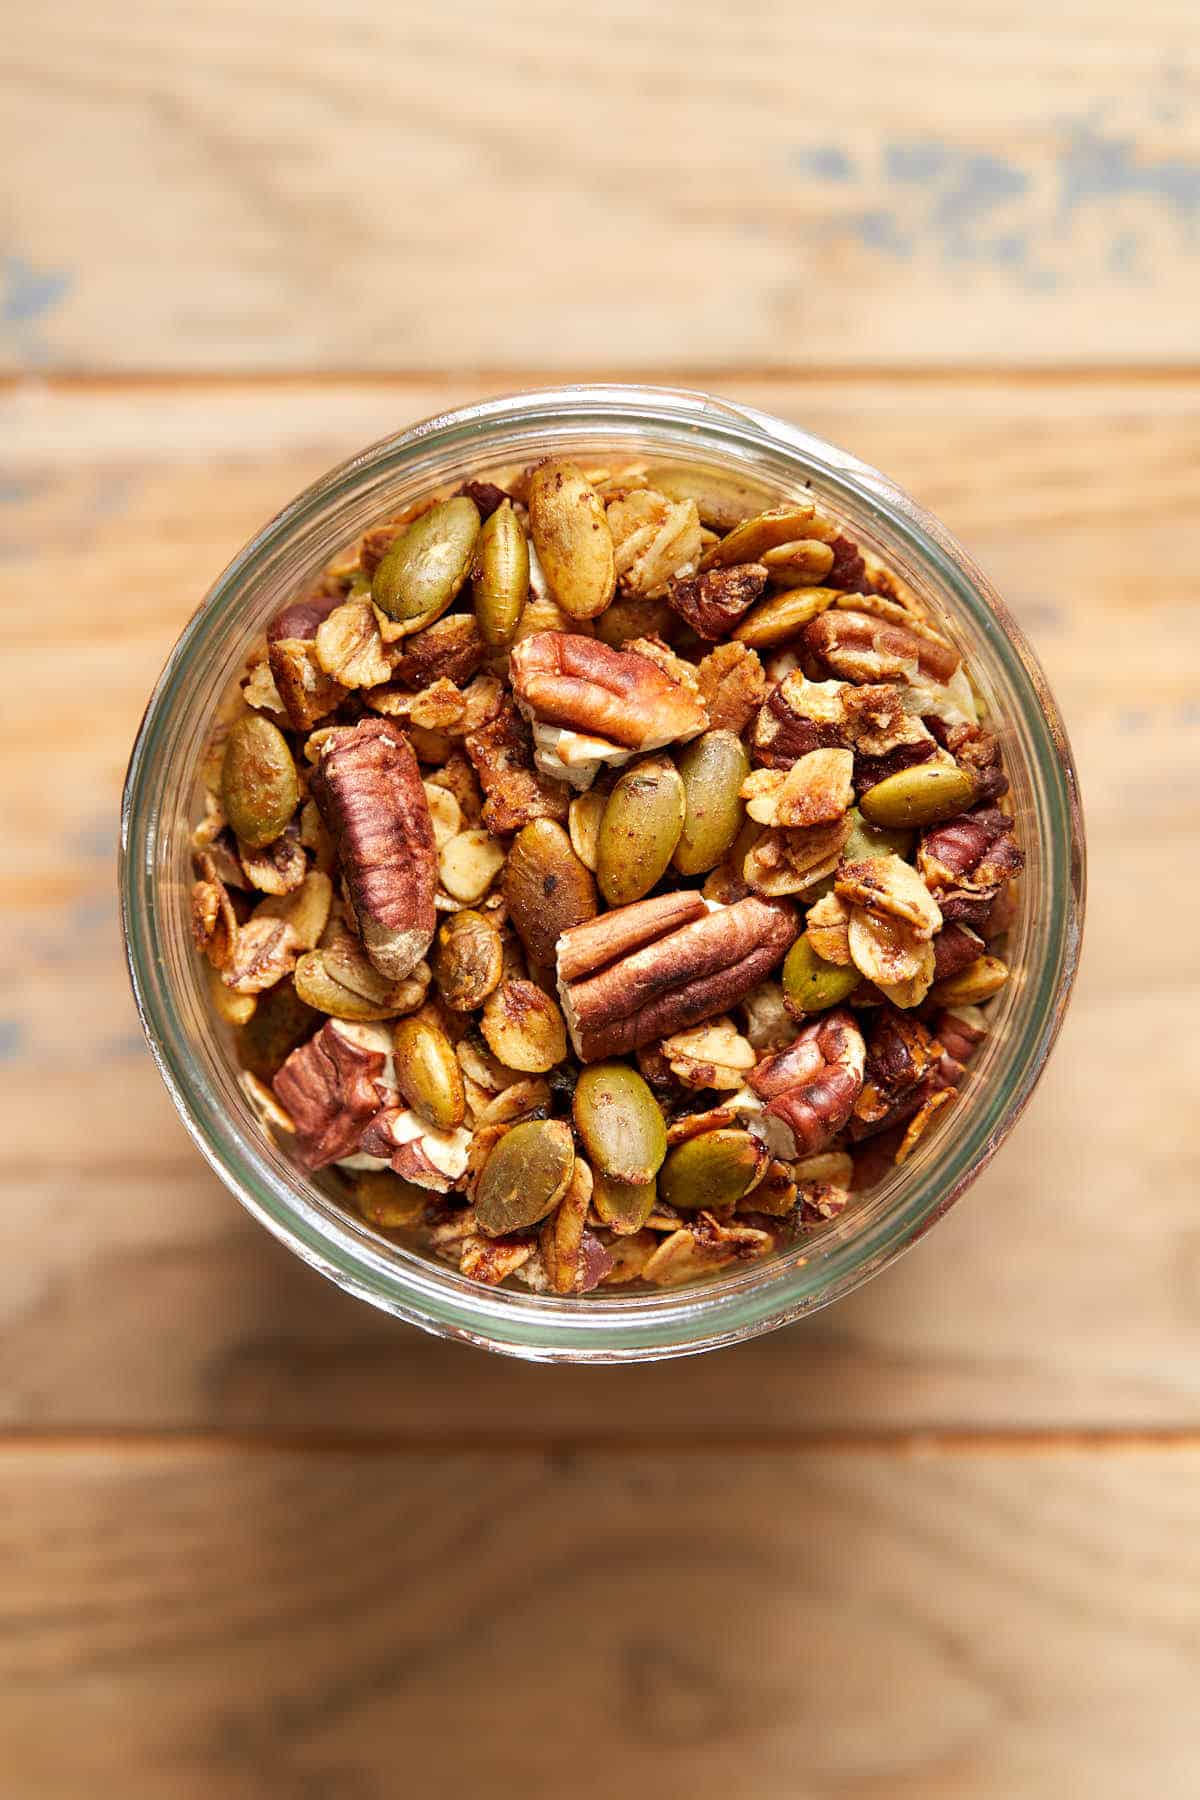 Overhead view of savory granola in a glass jar.